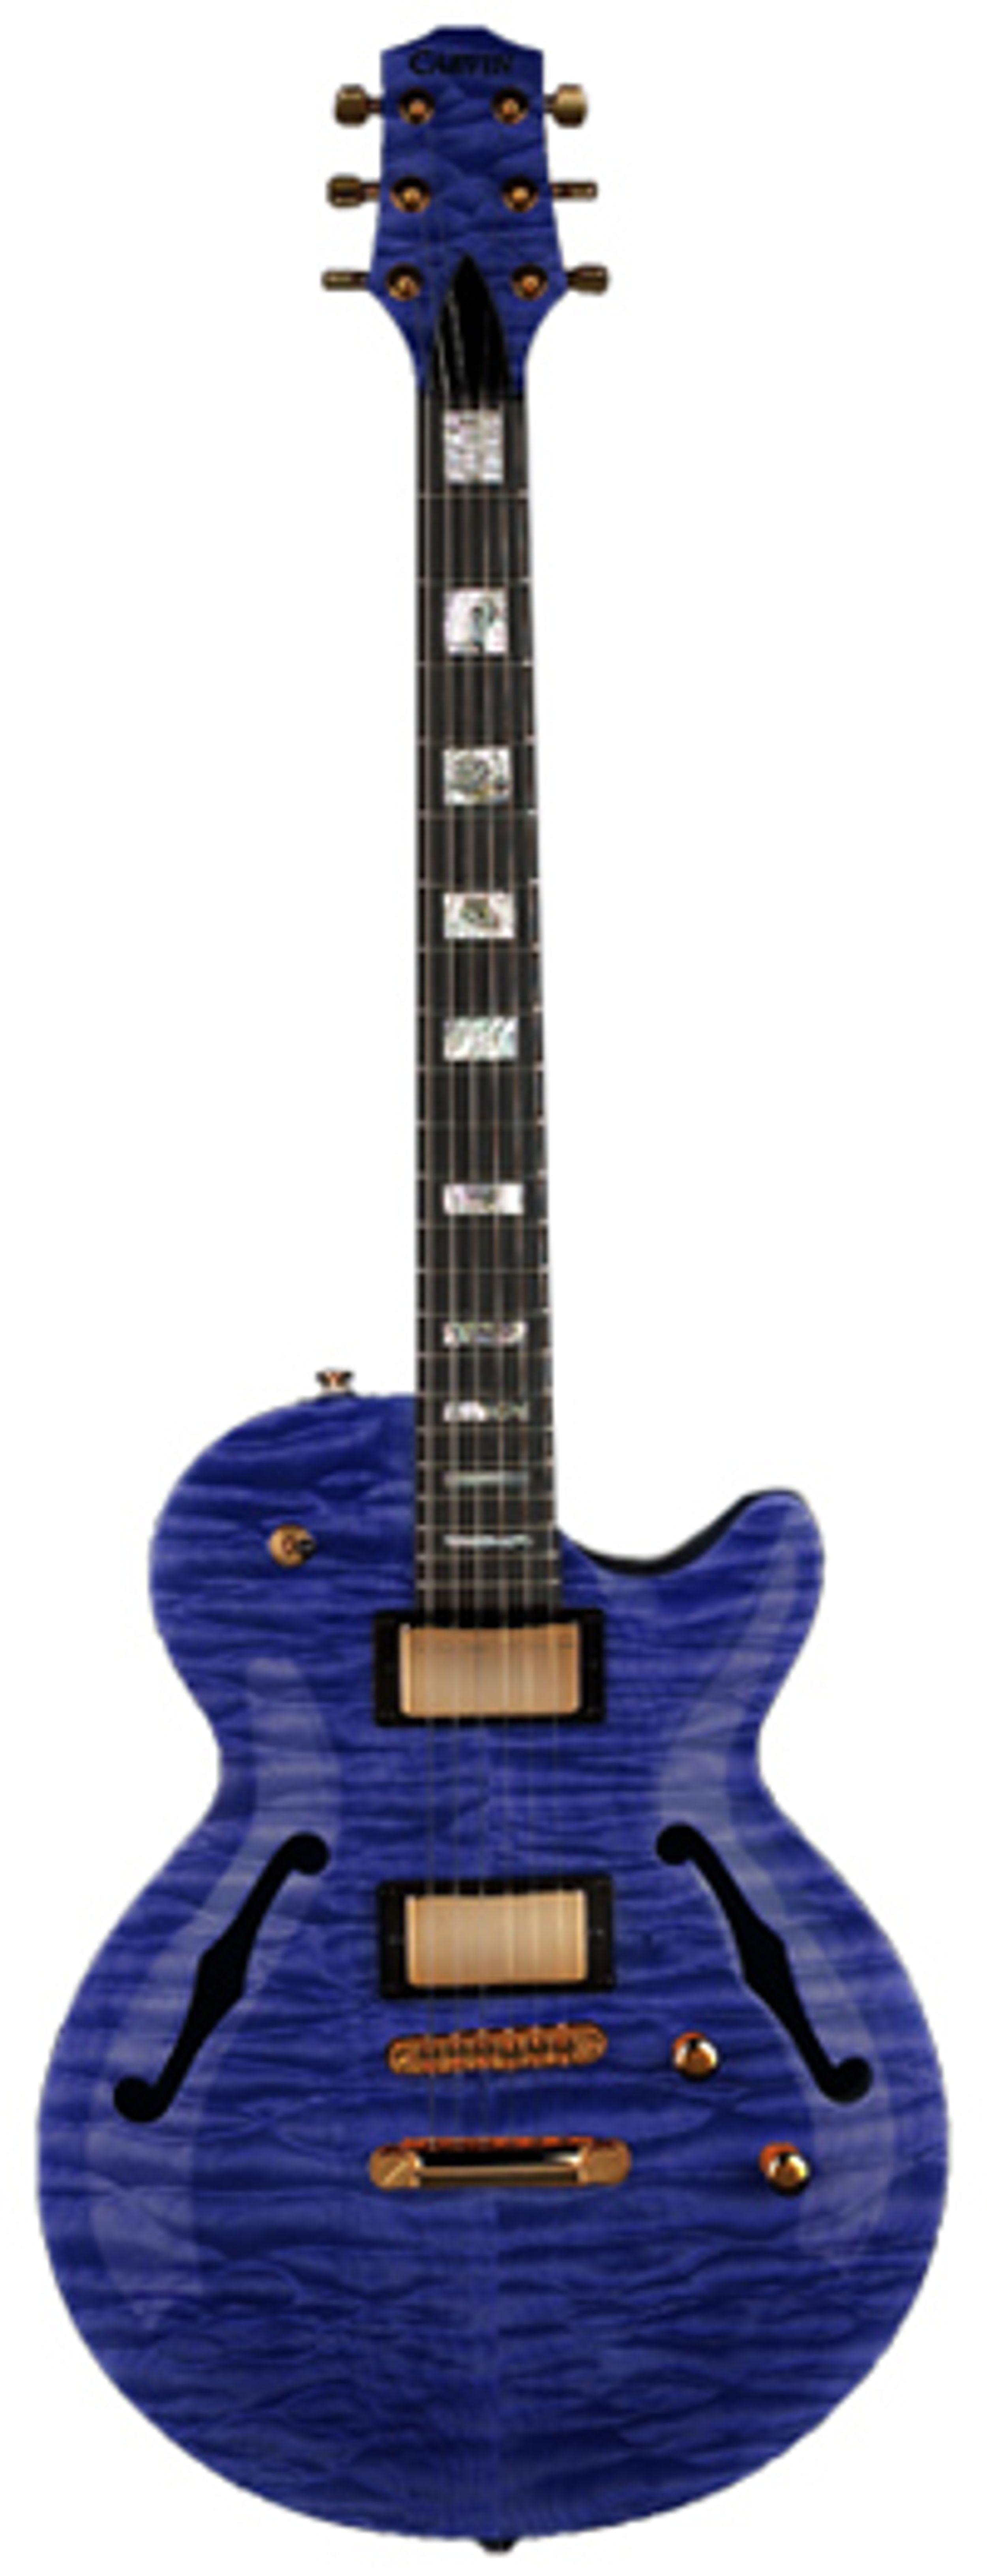 Review: Carvin SH550